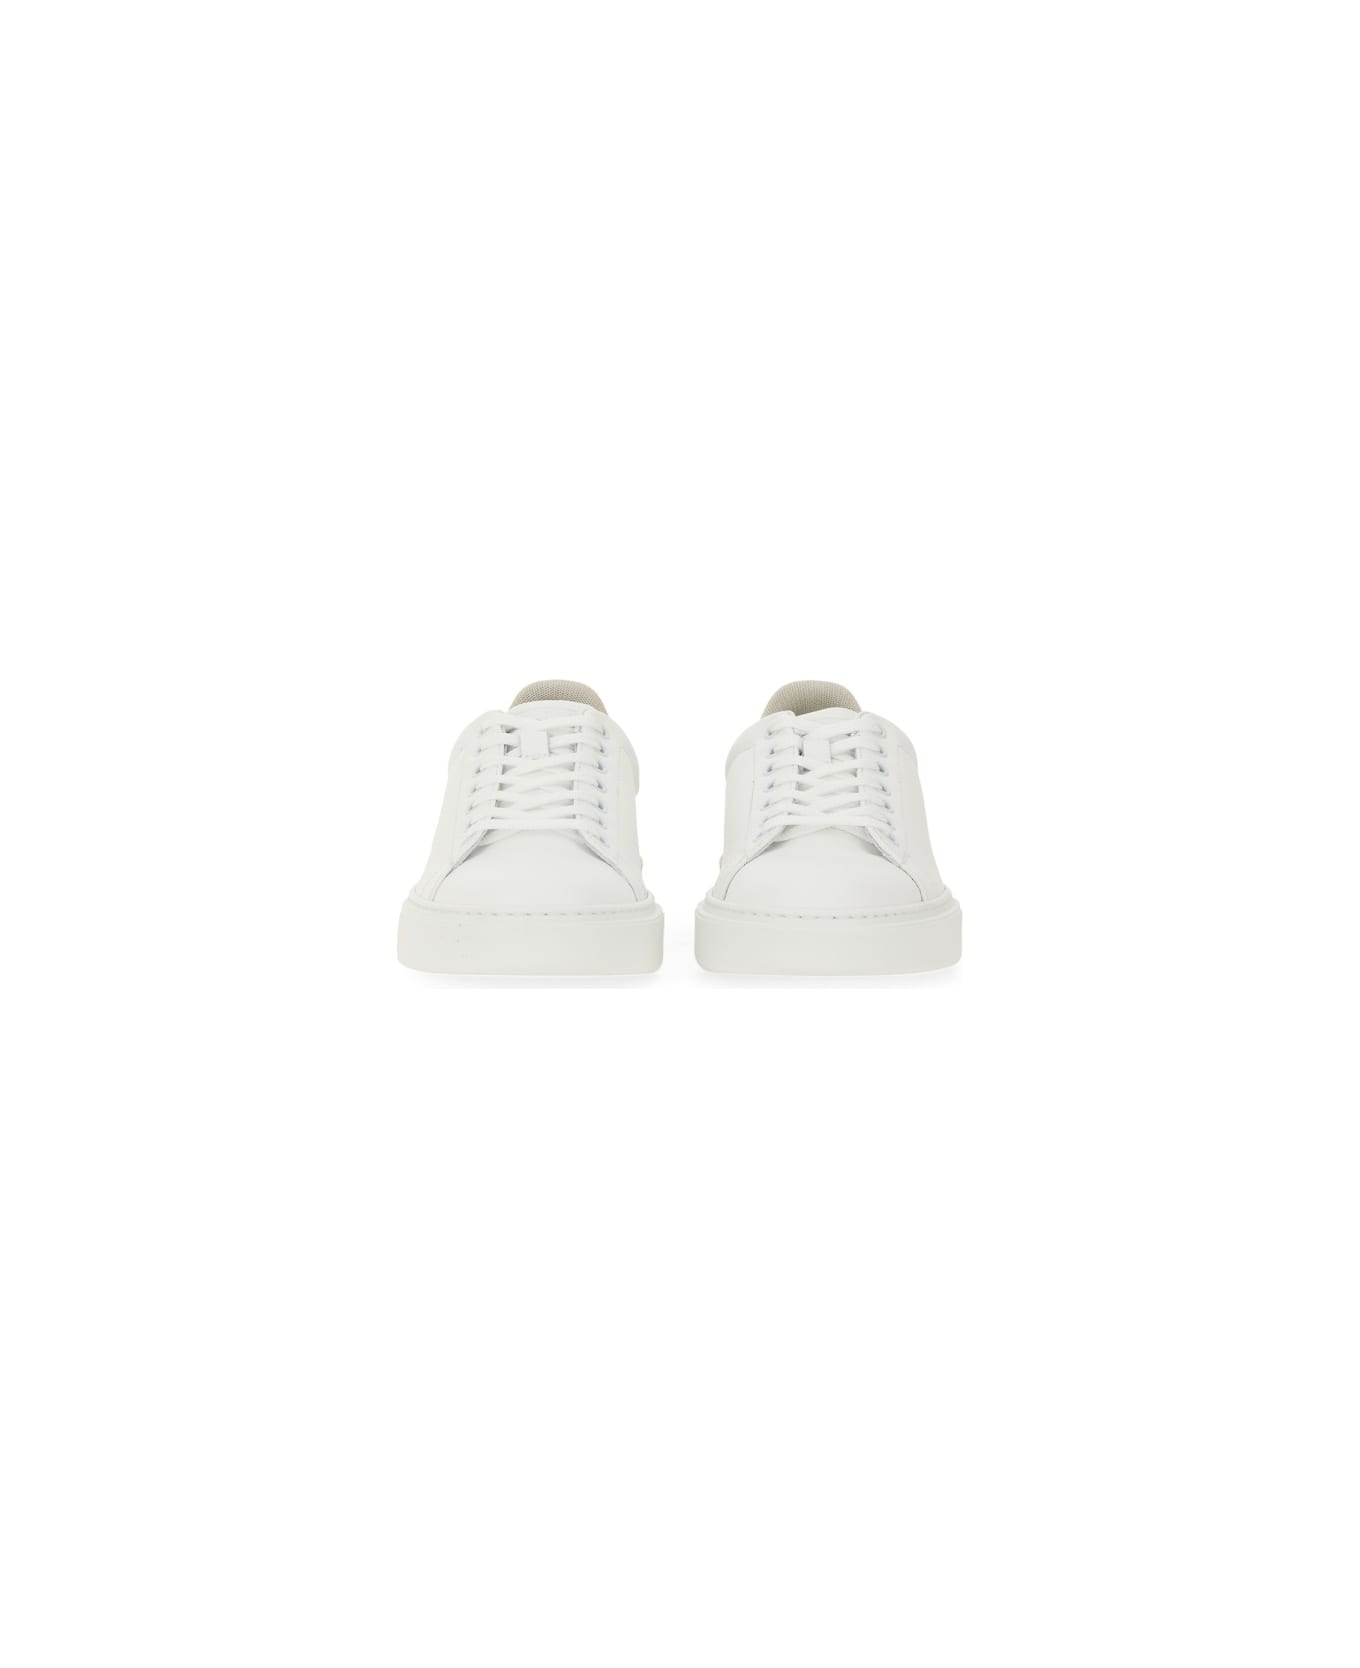 Woolrich Leather Sneaker - White サンダル